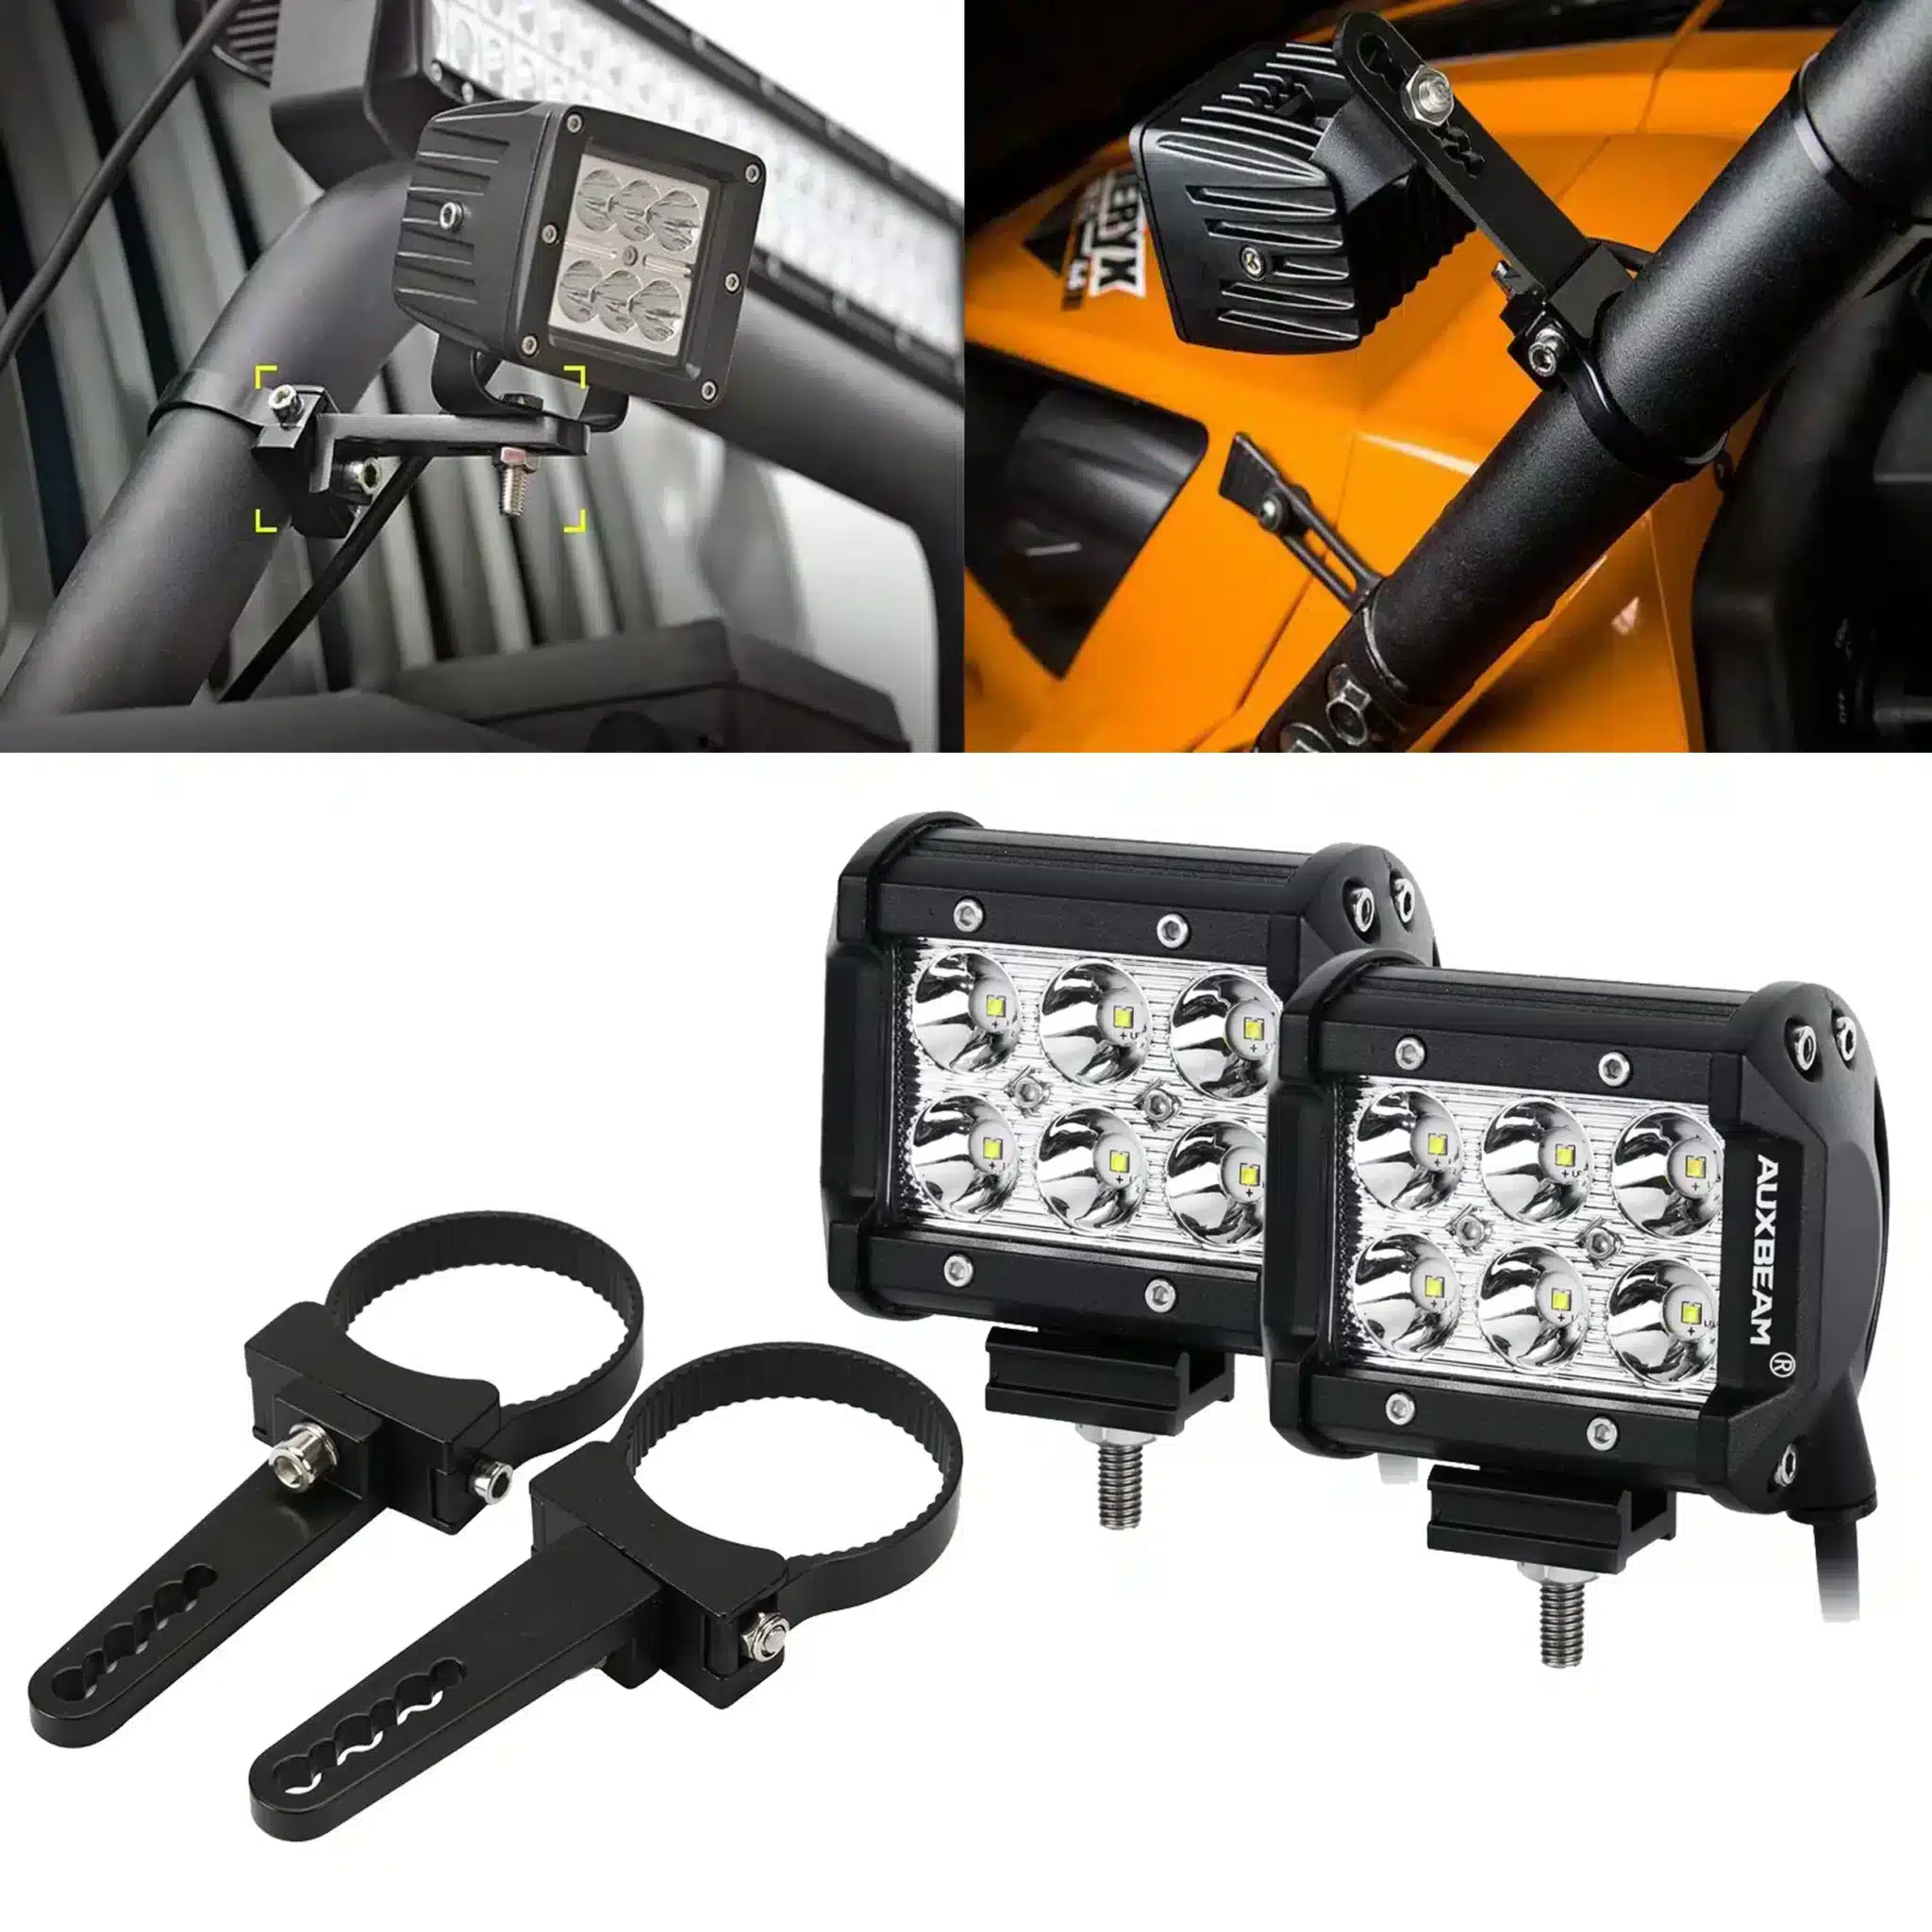 4 INCH CLASSIC-SM SERIES DUAL ROW LED POD LIGHTS SPOT/FLOOD BEAM & 2.5 INCH  BULL BAR ROLL CAGE CLAMPS MOUNTING BRACKETS COMBO FOR JEEP OFF-ROAD SUV